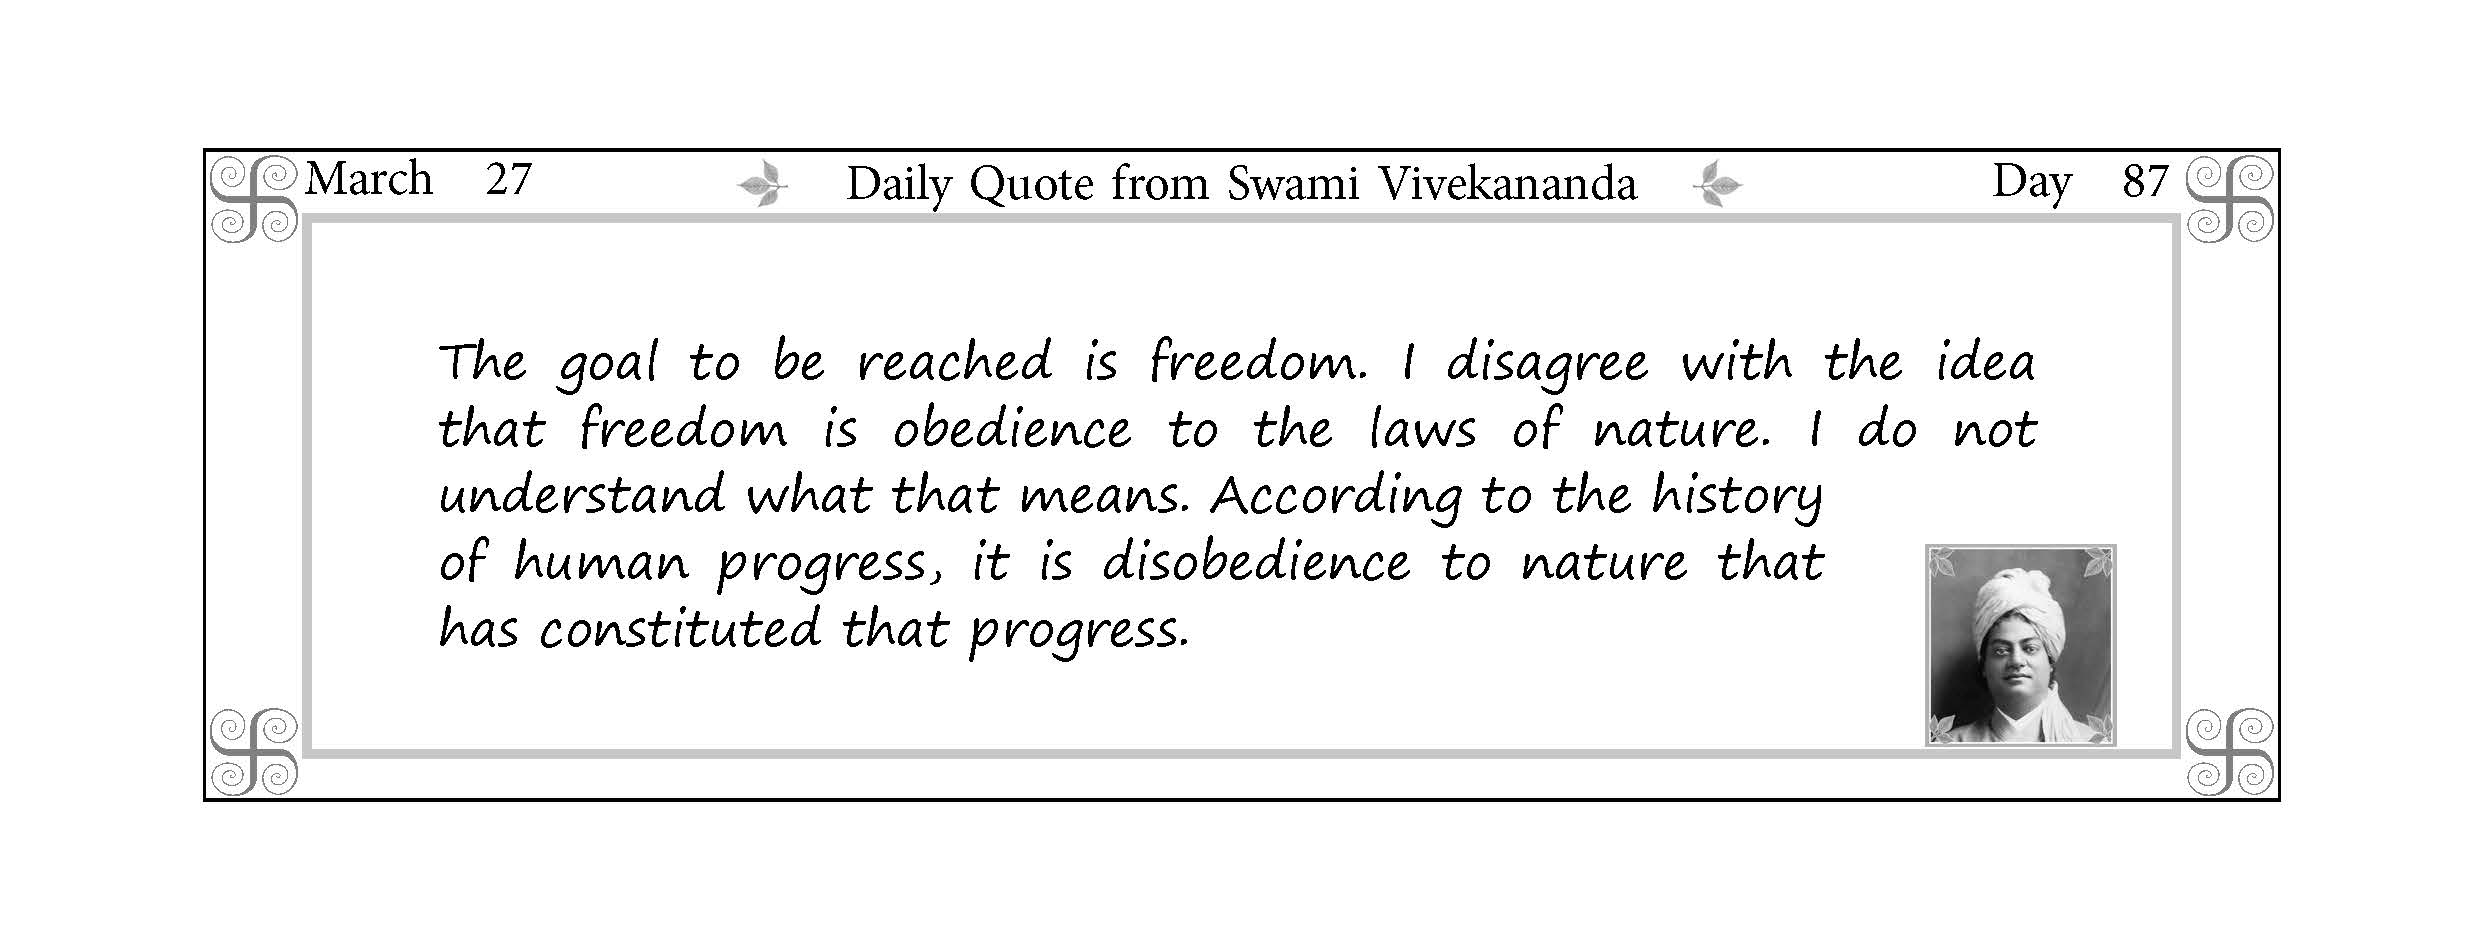 Rousing Dawn - Daily Quote from Swami Vivekananda